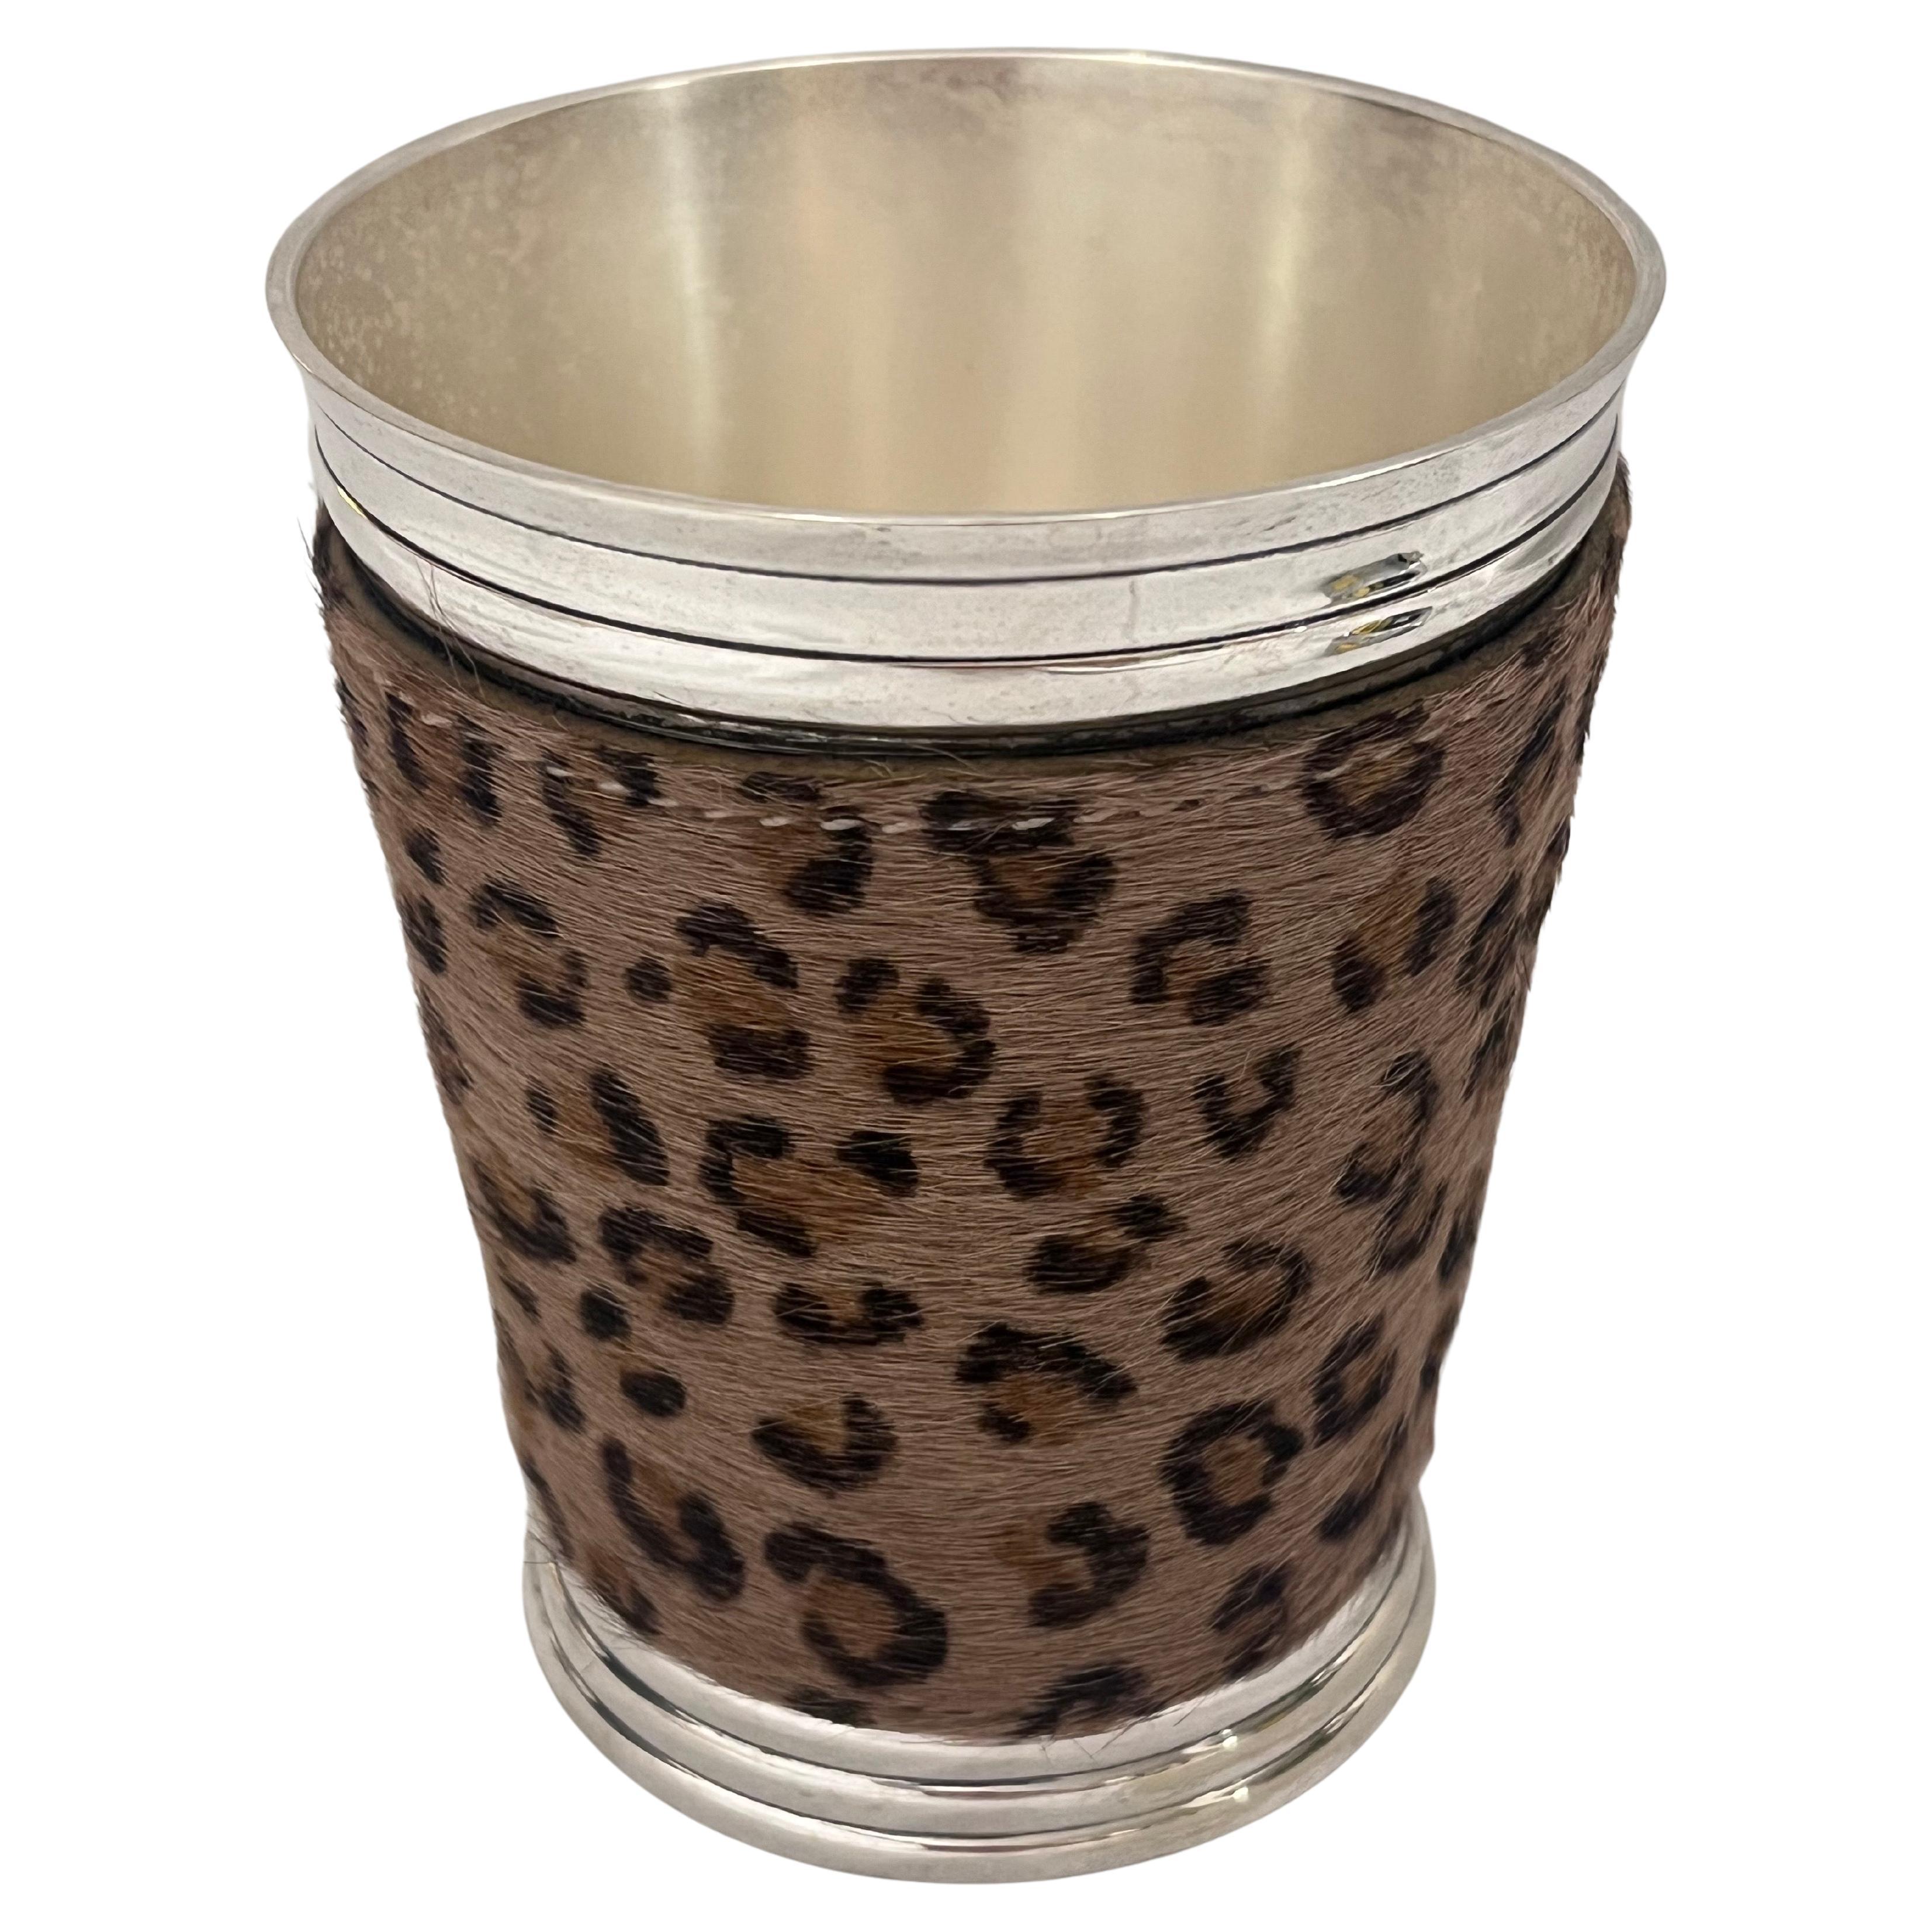 Dominic Chambon Paris Silvered Metal and Faux Fur Leather Covered Beaker or Cup For Sale